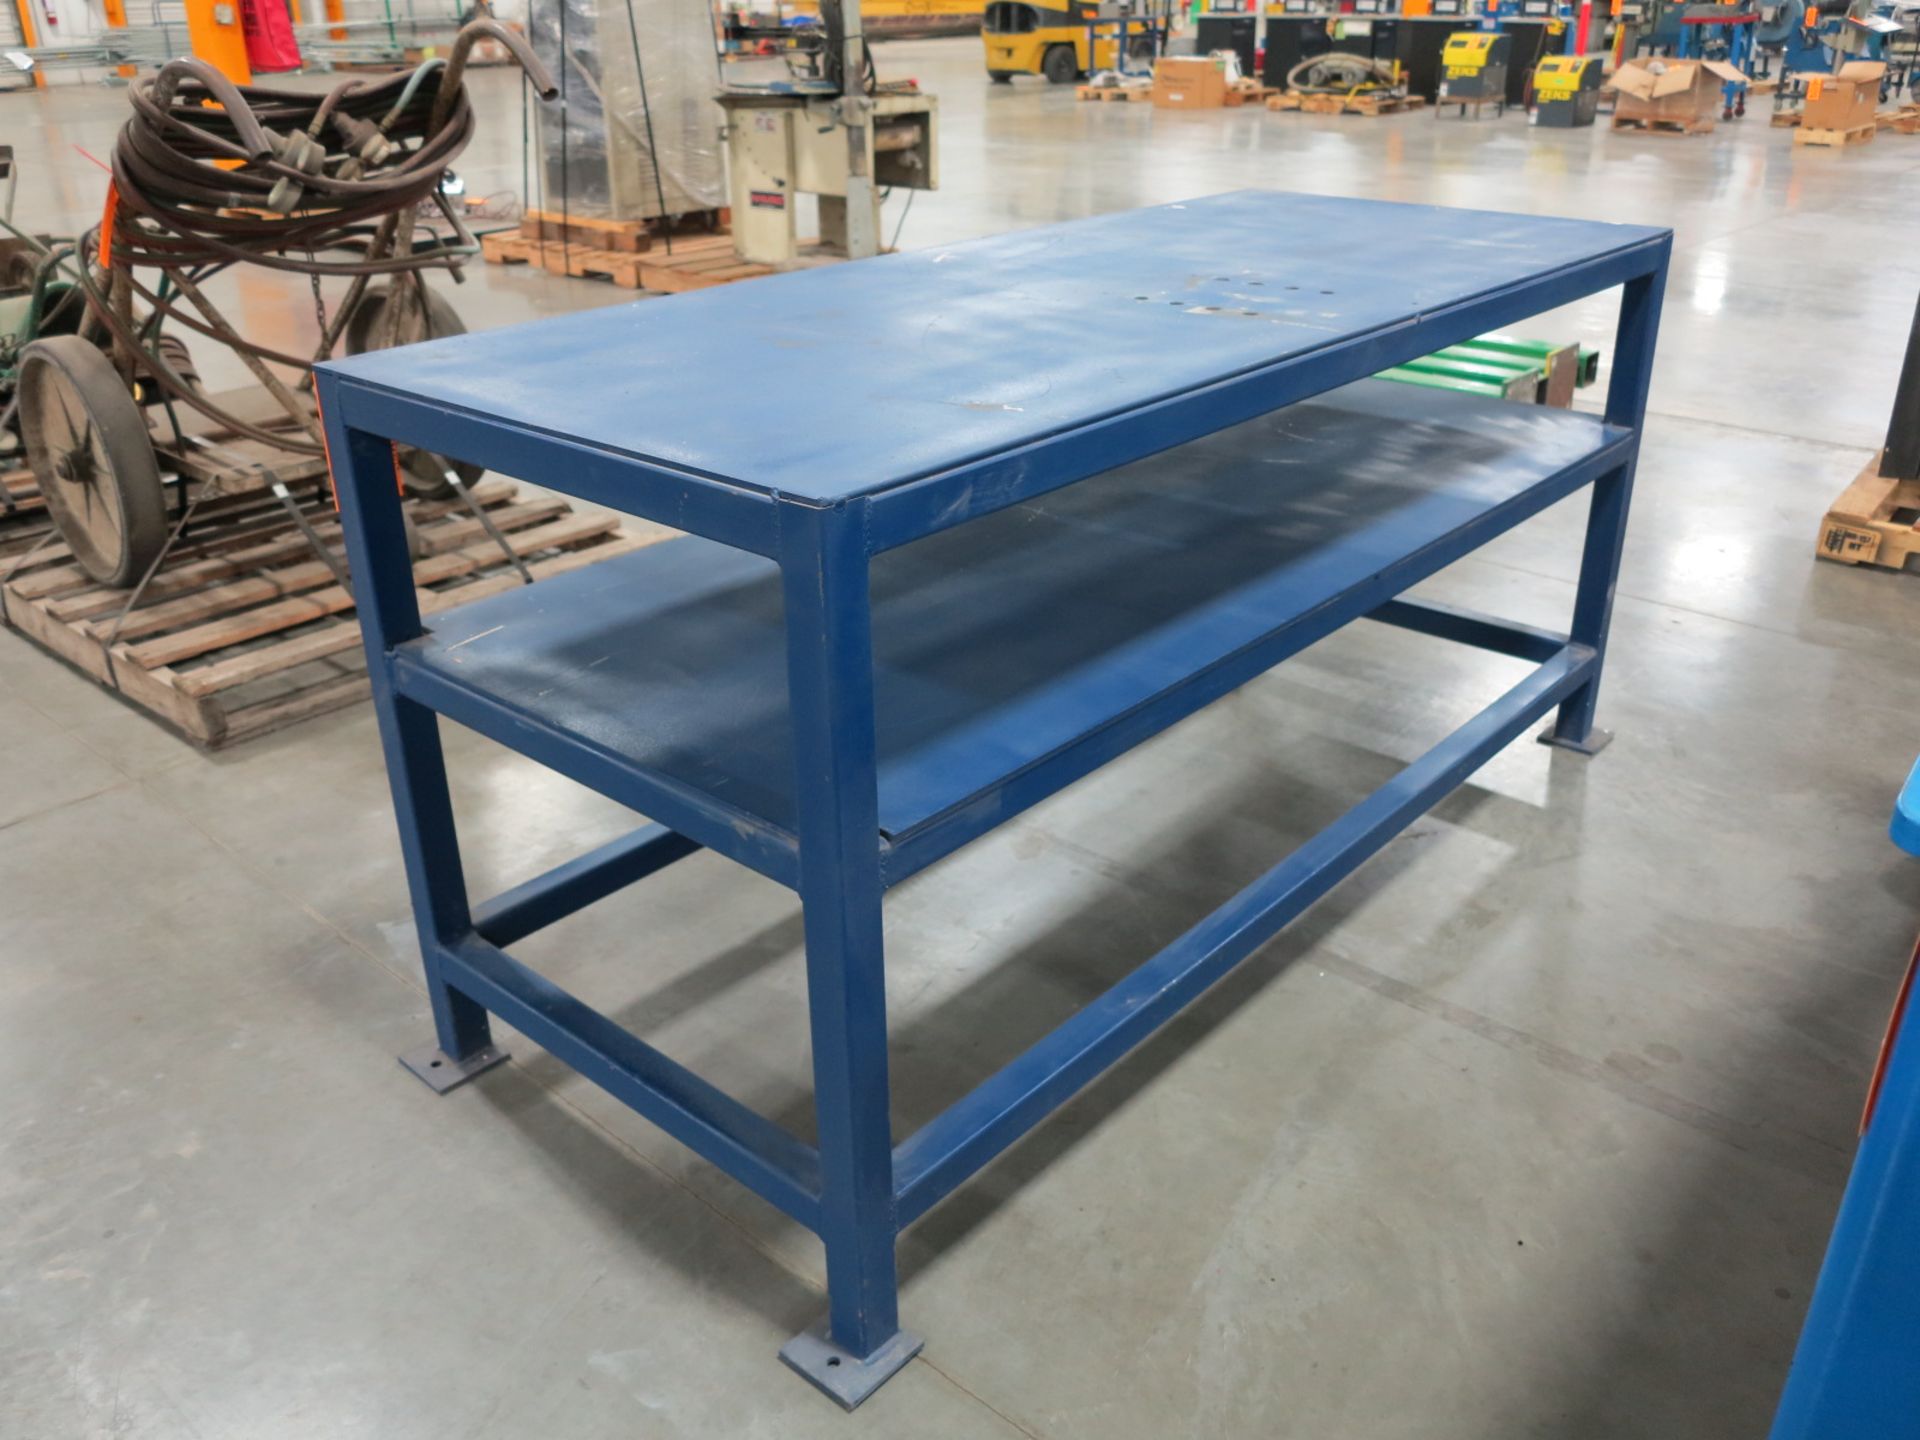 Metal Table on Casters, 72" x 30" x 36" - Image 2 of 2